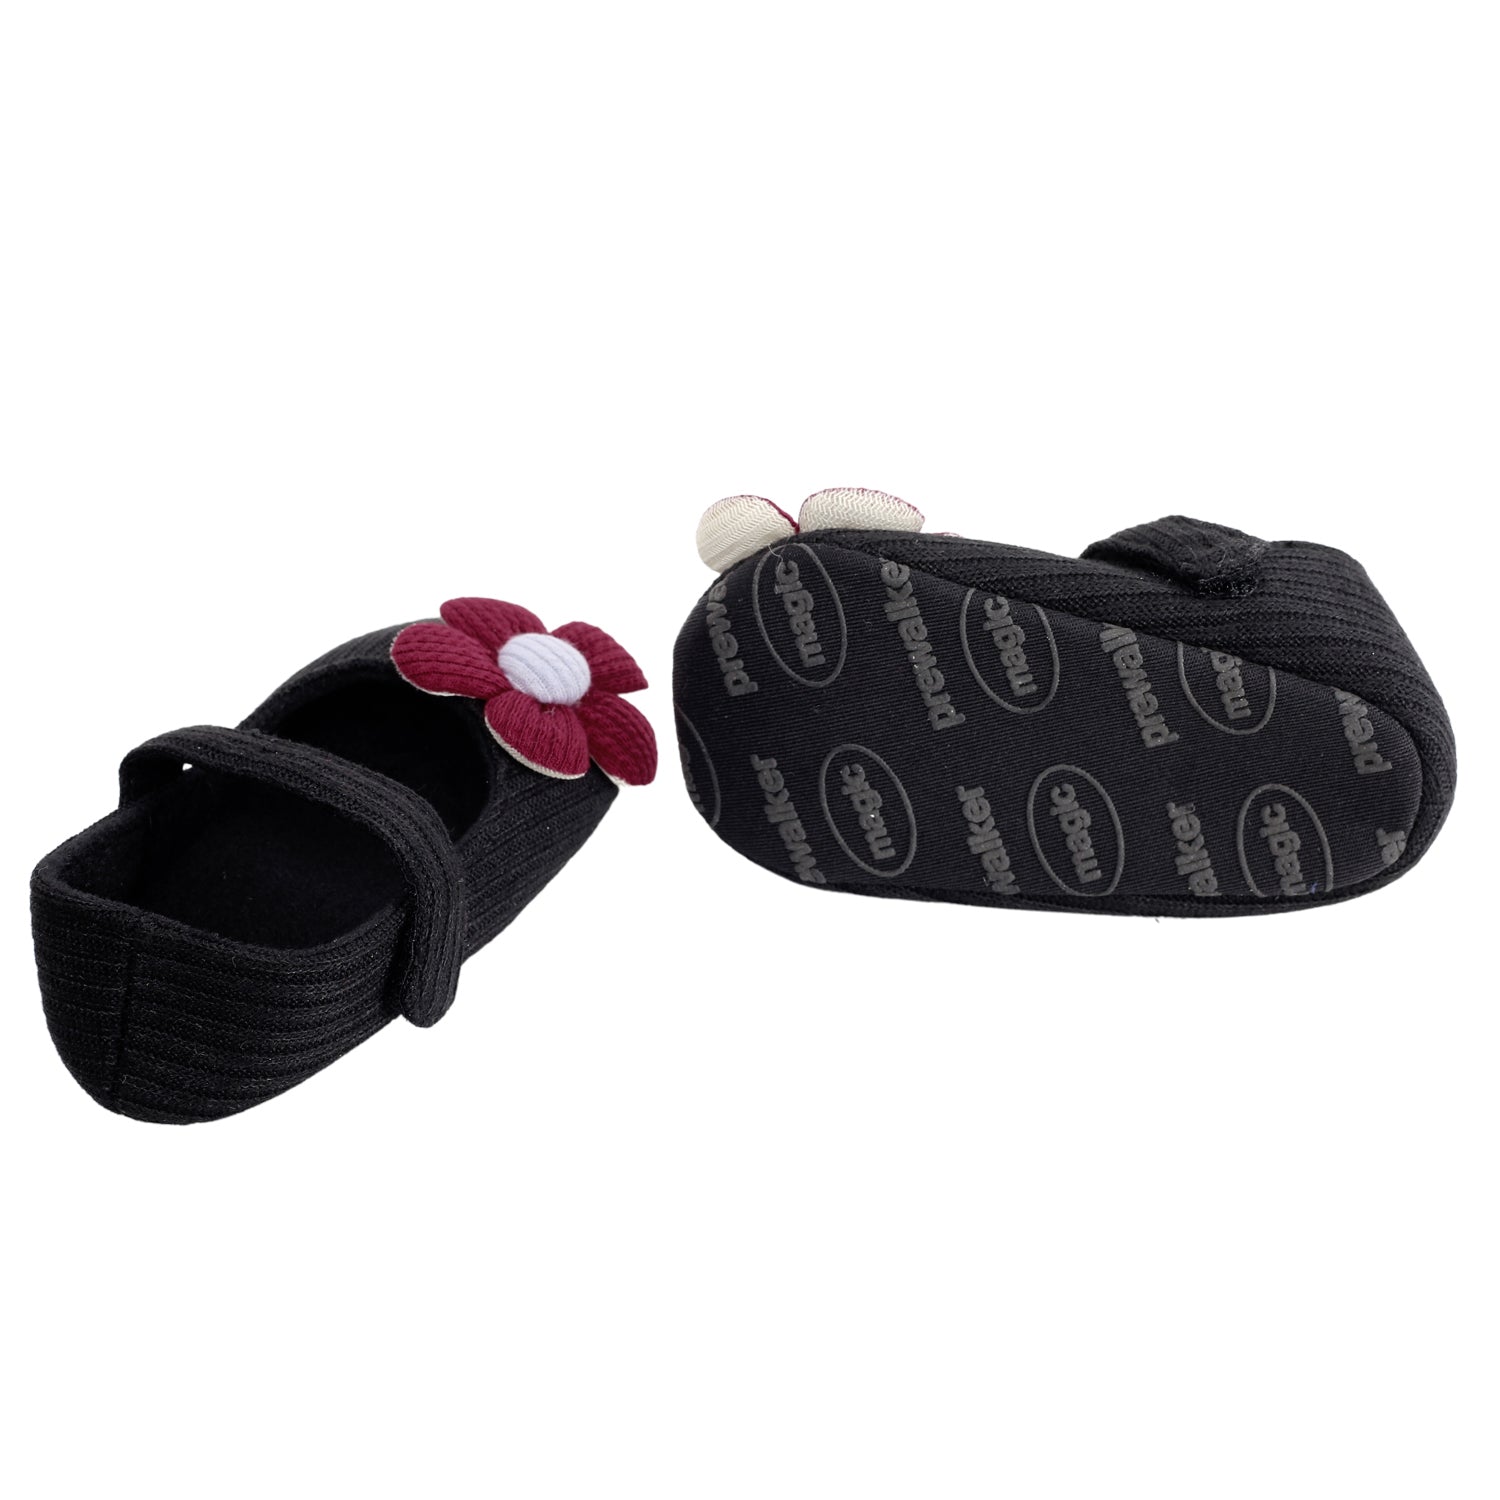 Floral Applique Black And Red Booties - Baby Moo